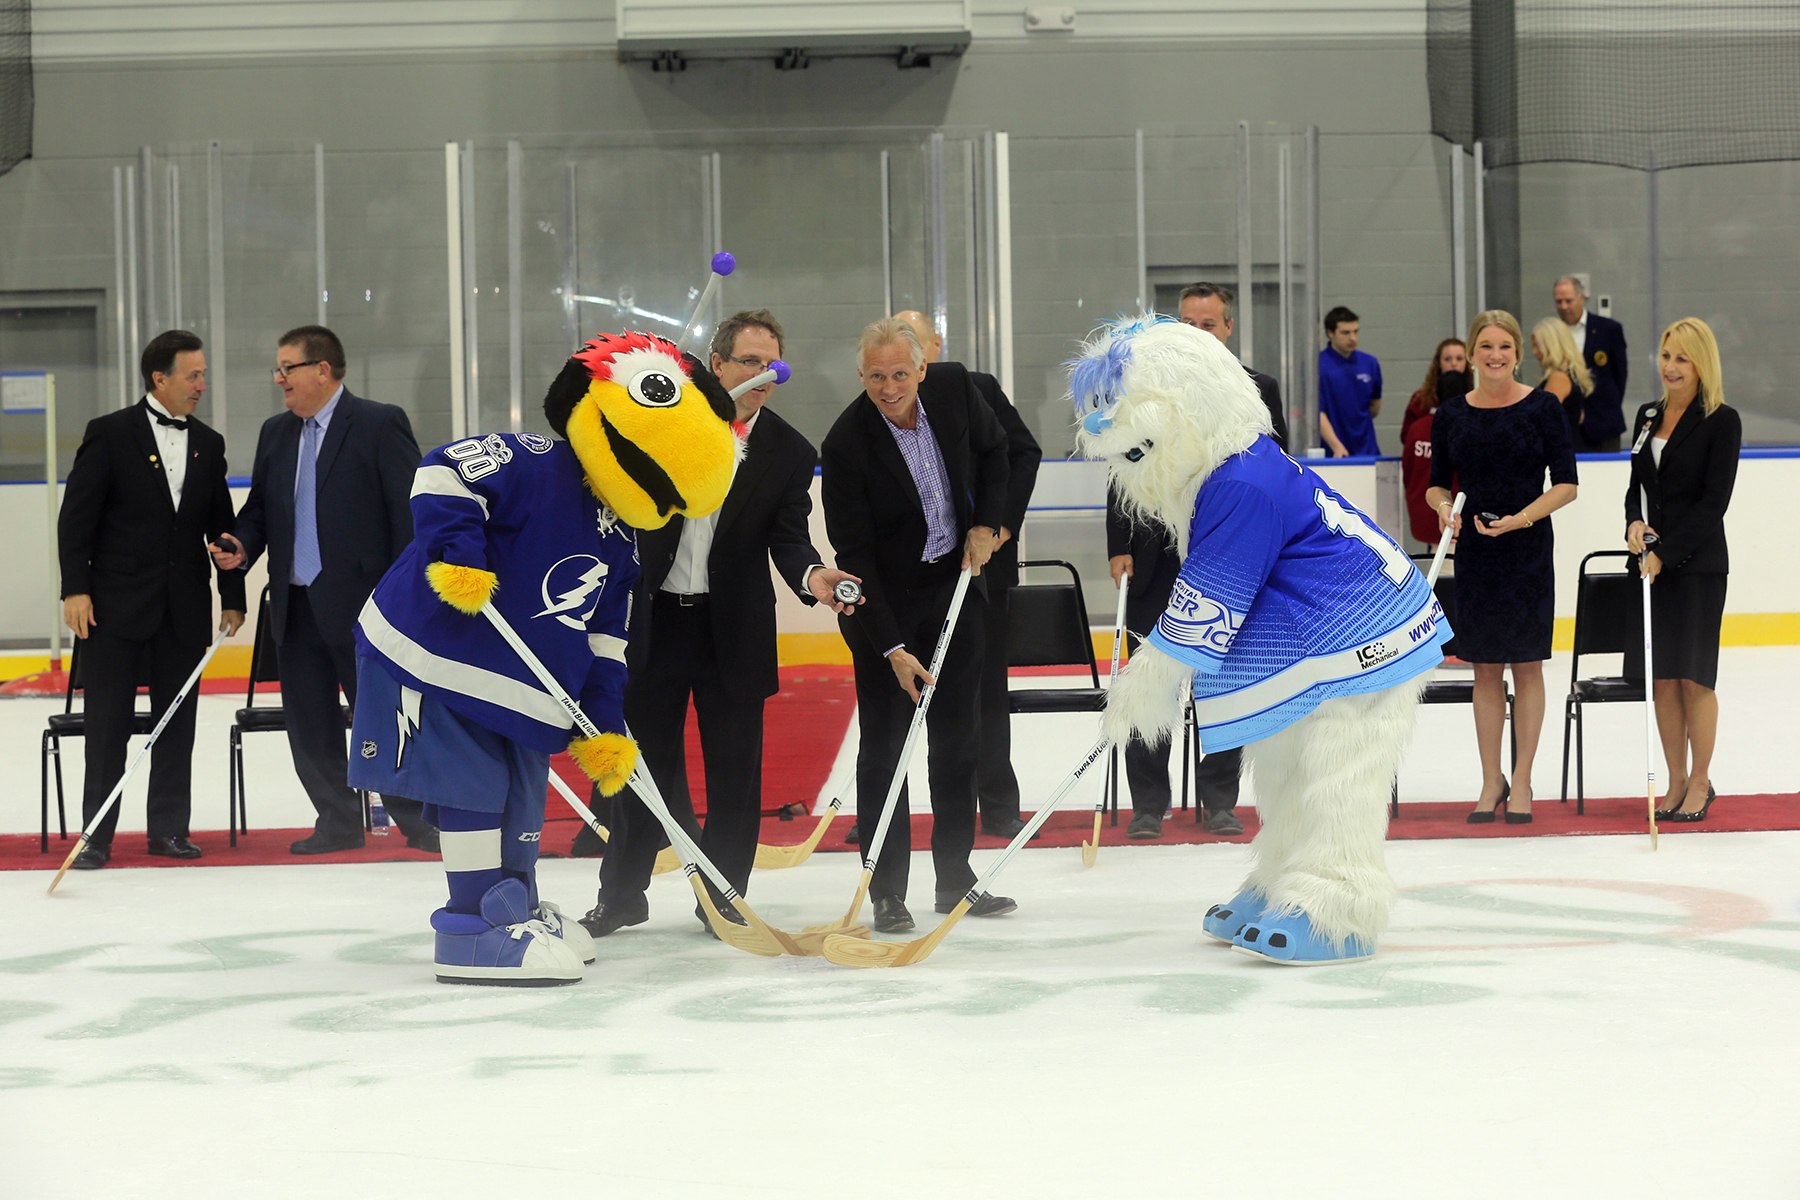 Florida Hospital Center Ice Mascot, IC and Tampa Bay Lightning Mascot, ThunderBug face-off at the "Puck Dropping" Event